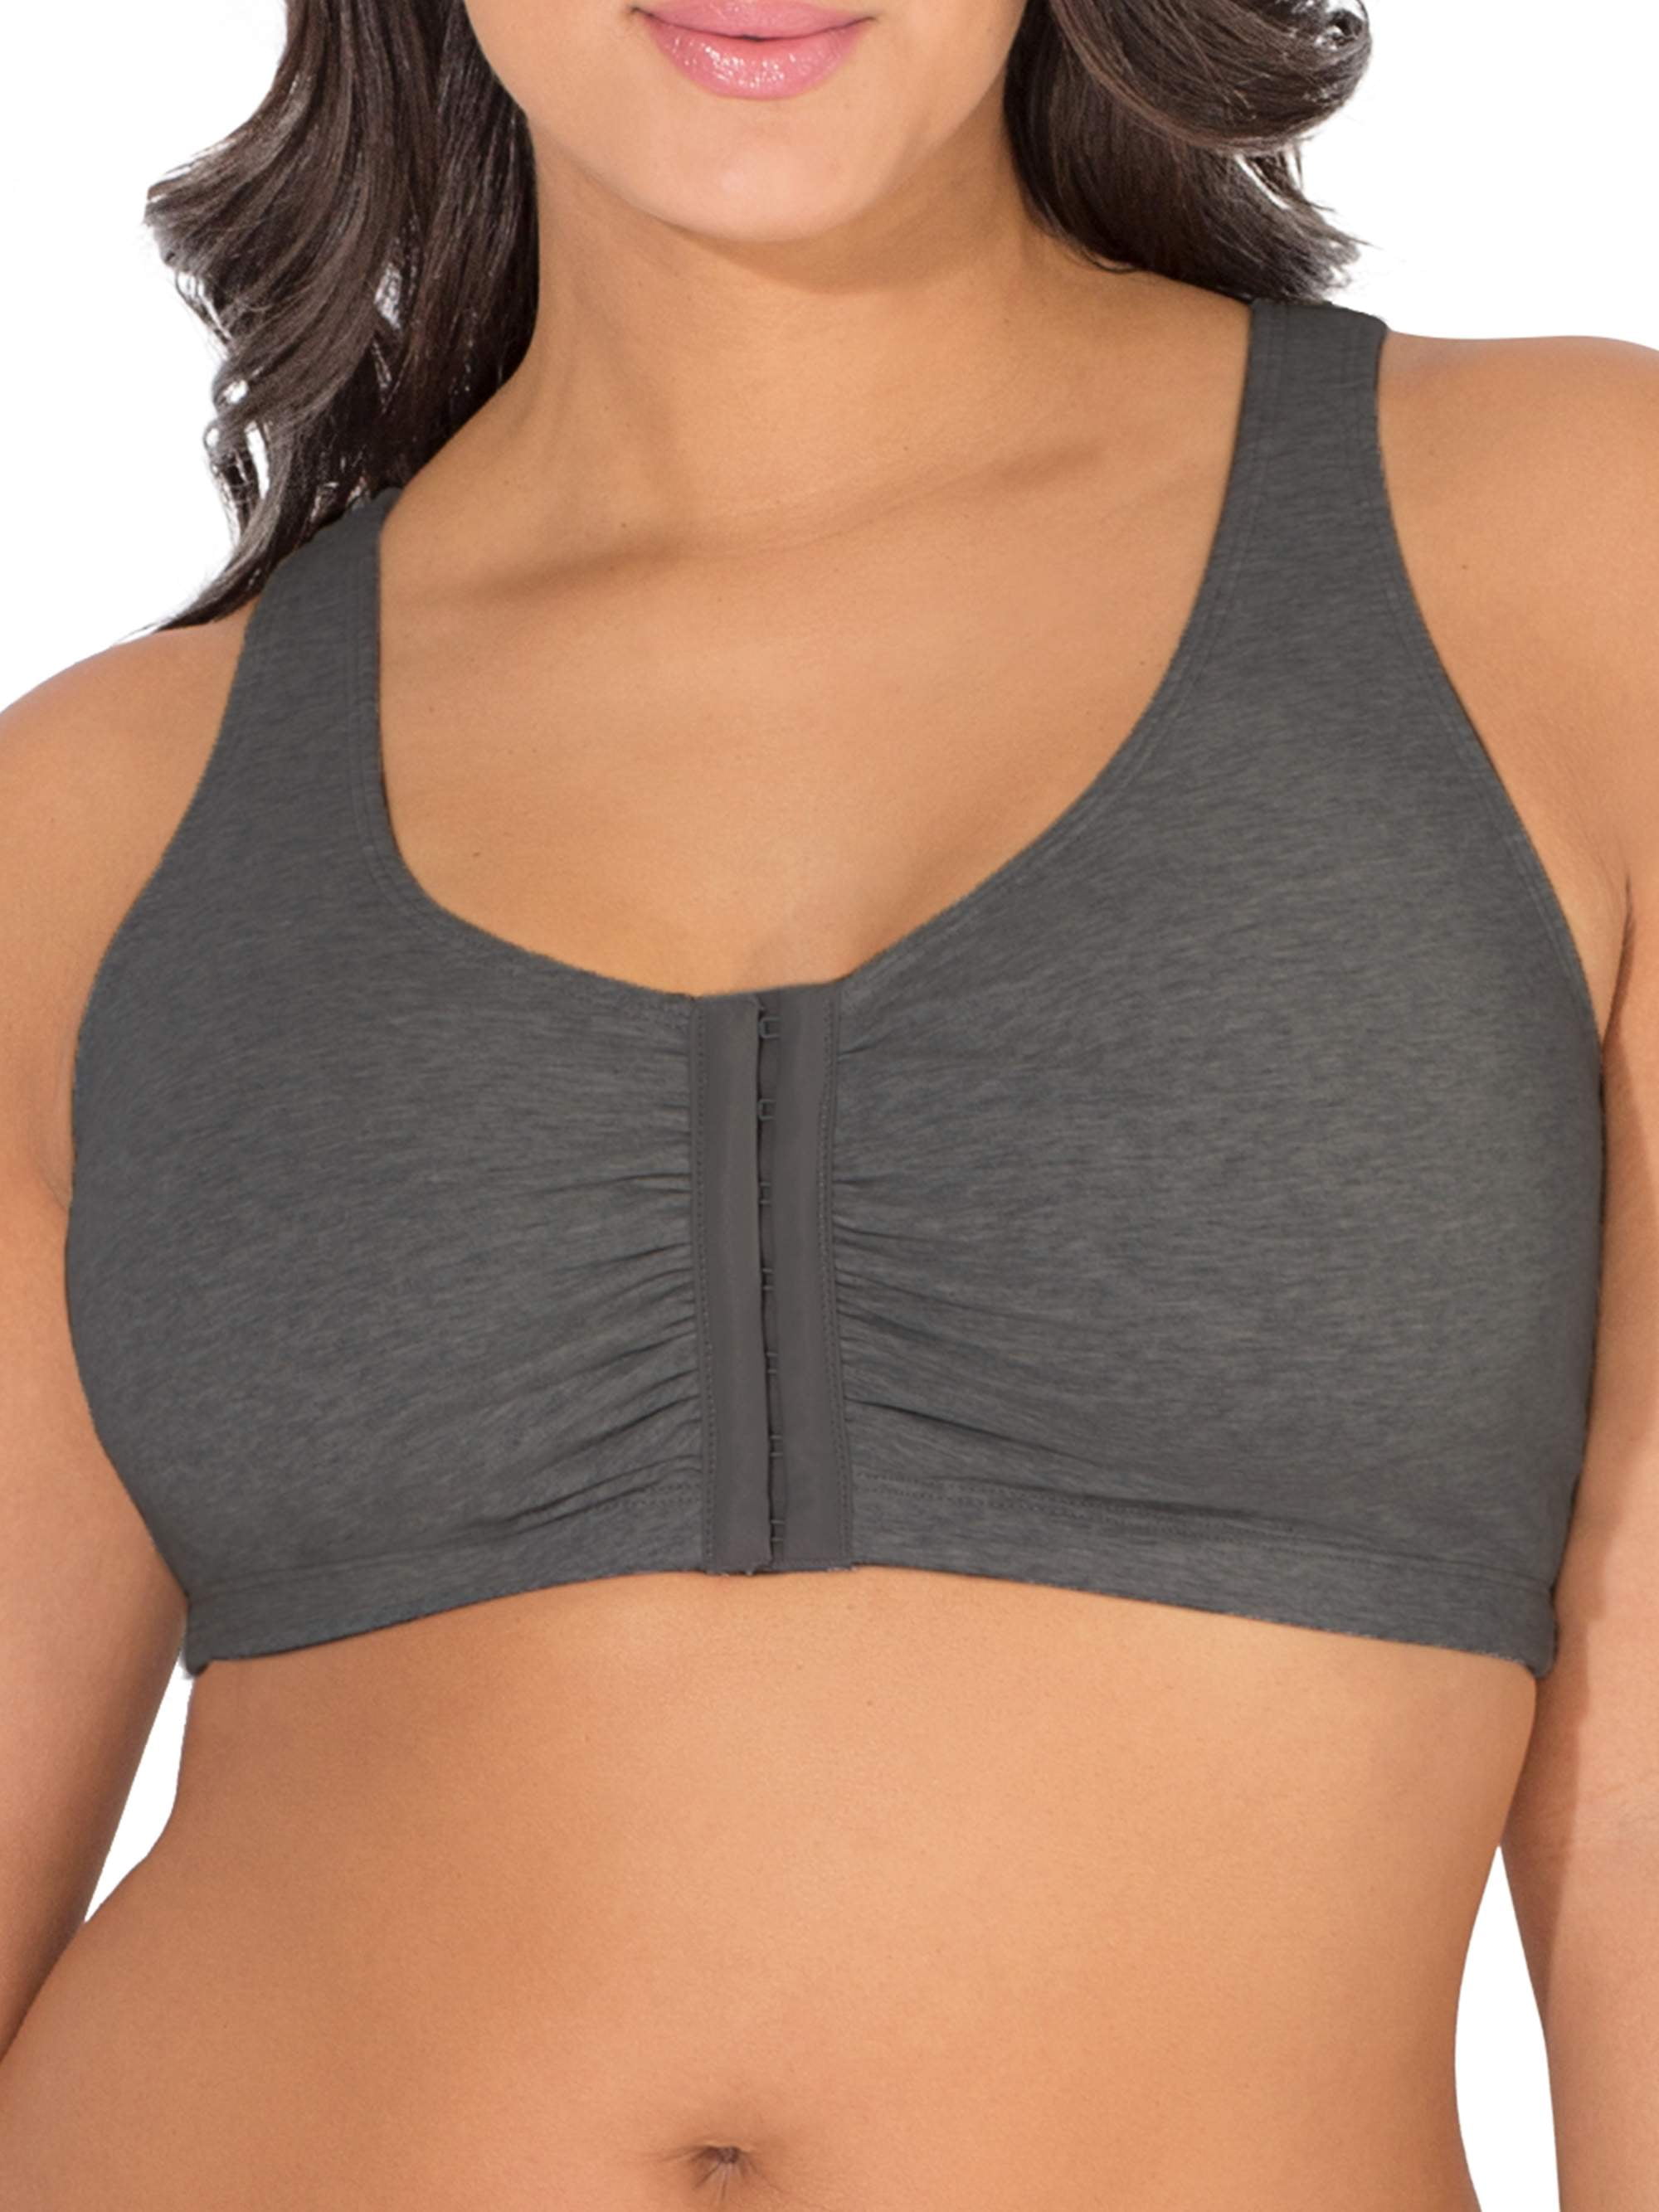 Fruit of the Loom Womens Comfort Front Close Sport Bra W/ Mesh Straps